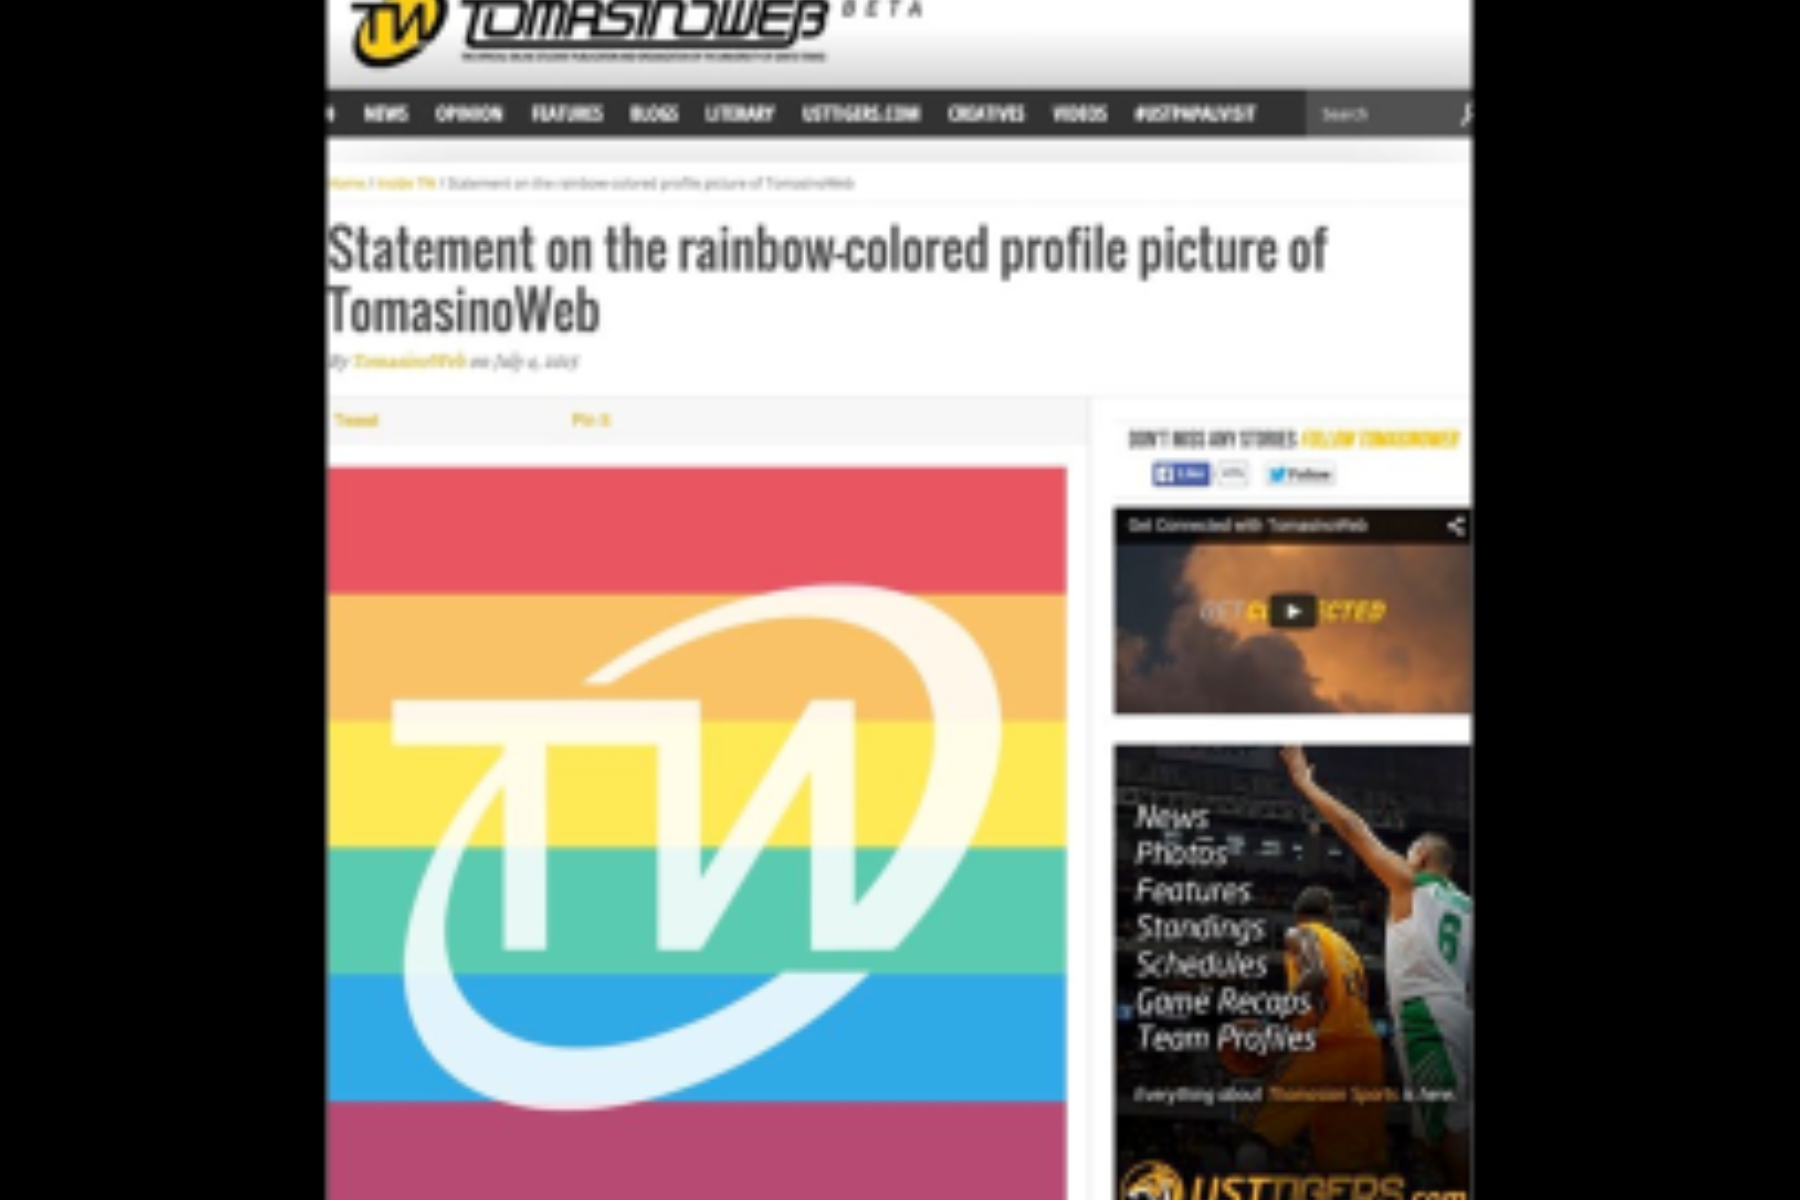 UST Online Student Paper Ignites Controversy Over LGBT Flag Posting